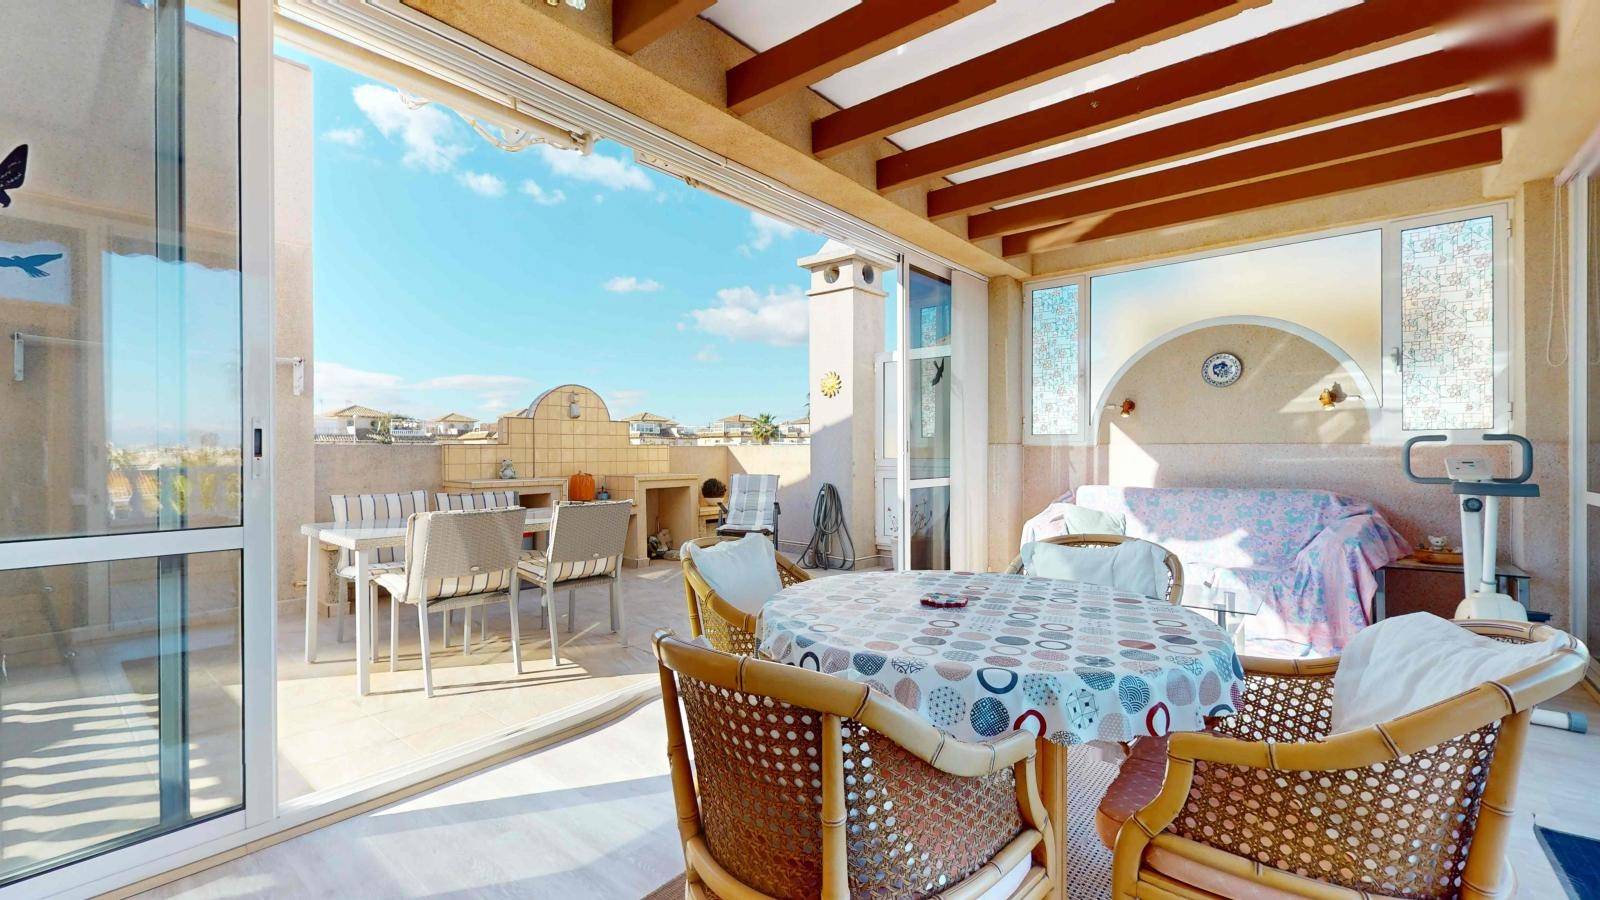 DUPLEX PENTHOUSE BUNGALOW IN PLAYA FLAMENCA WITH PRIVATE PARKING